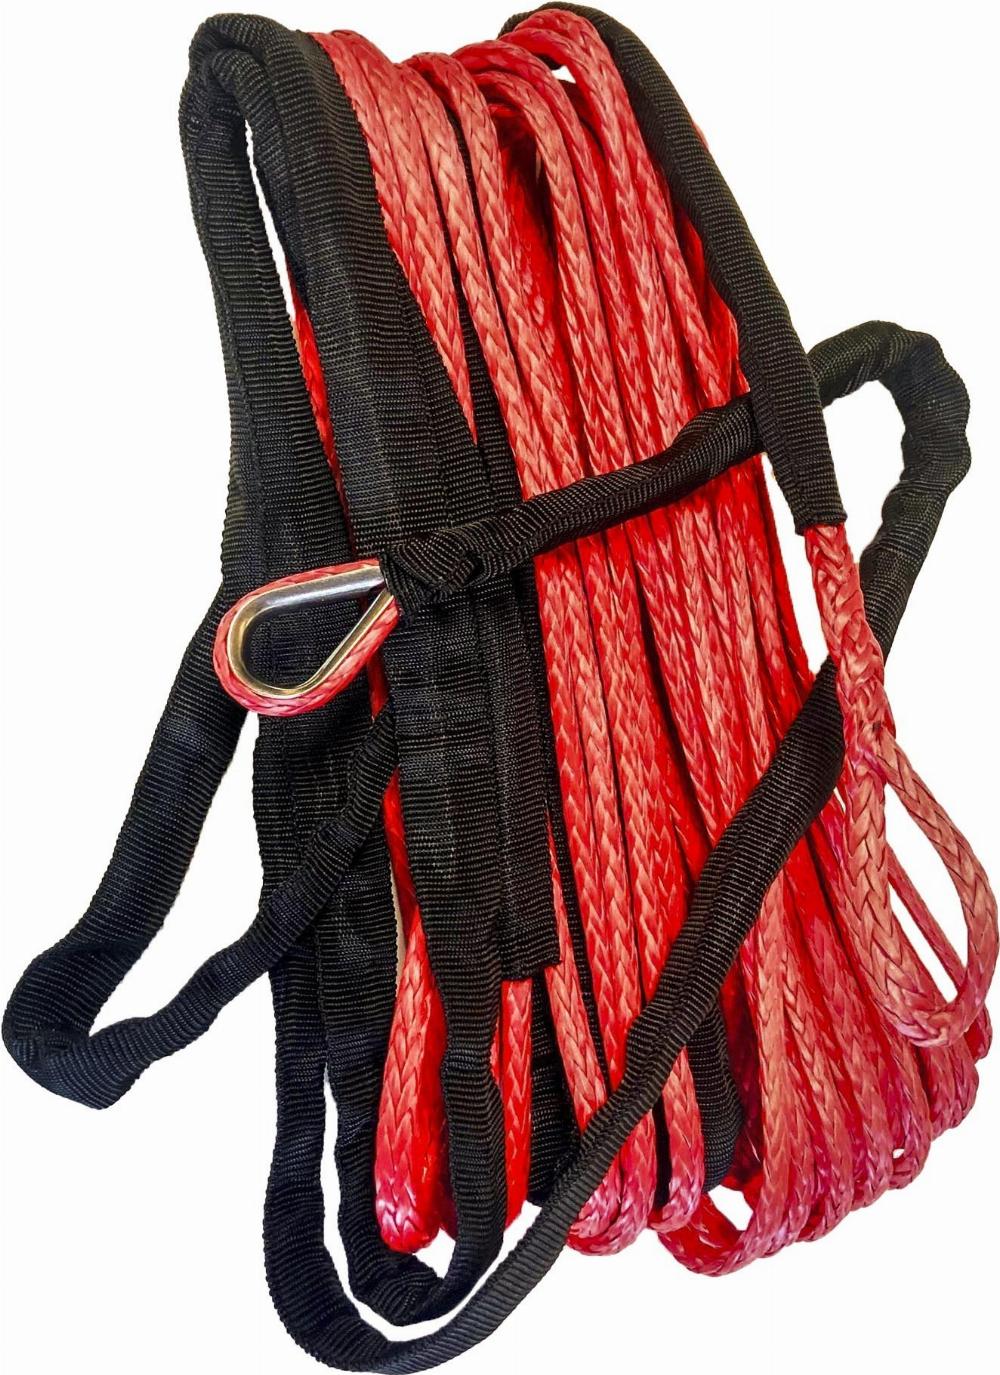 SYNTHETIC WINCH ROPE 1/4" DIAMETER X 50 FT. RED#mpn_700-2150